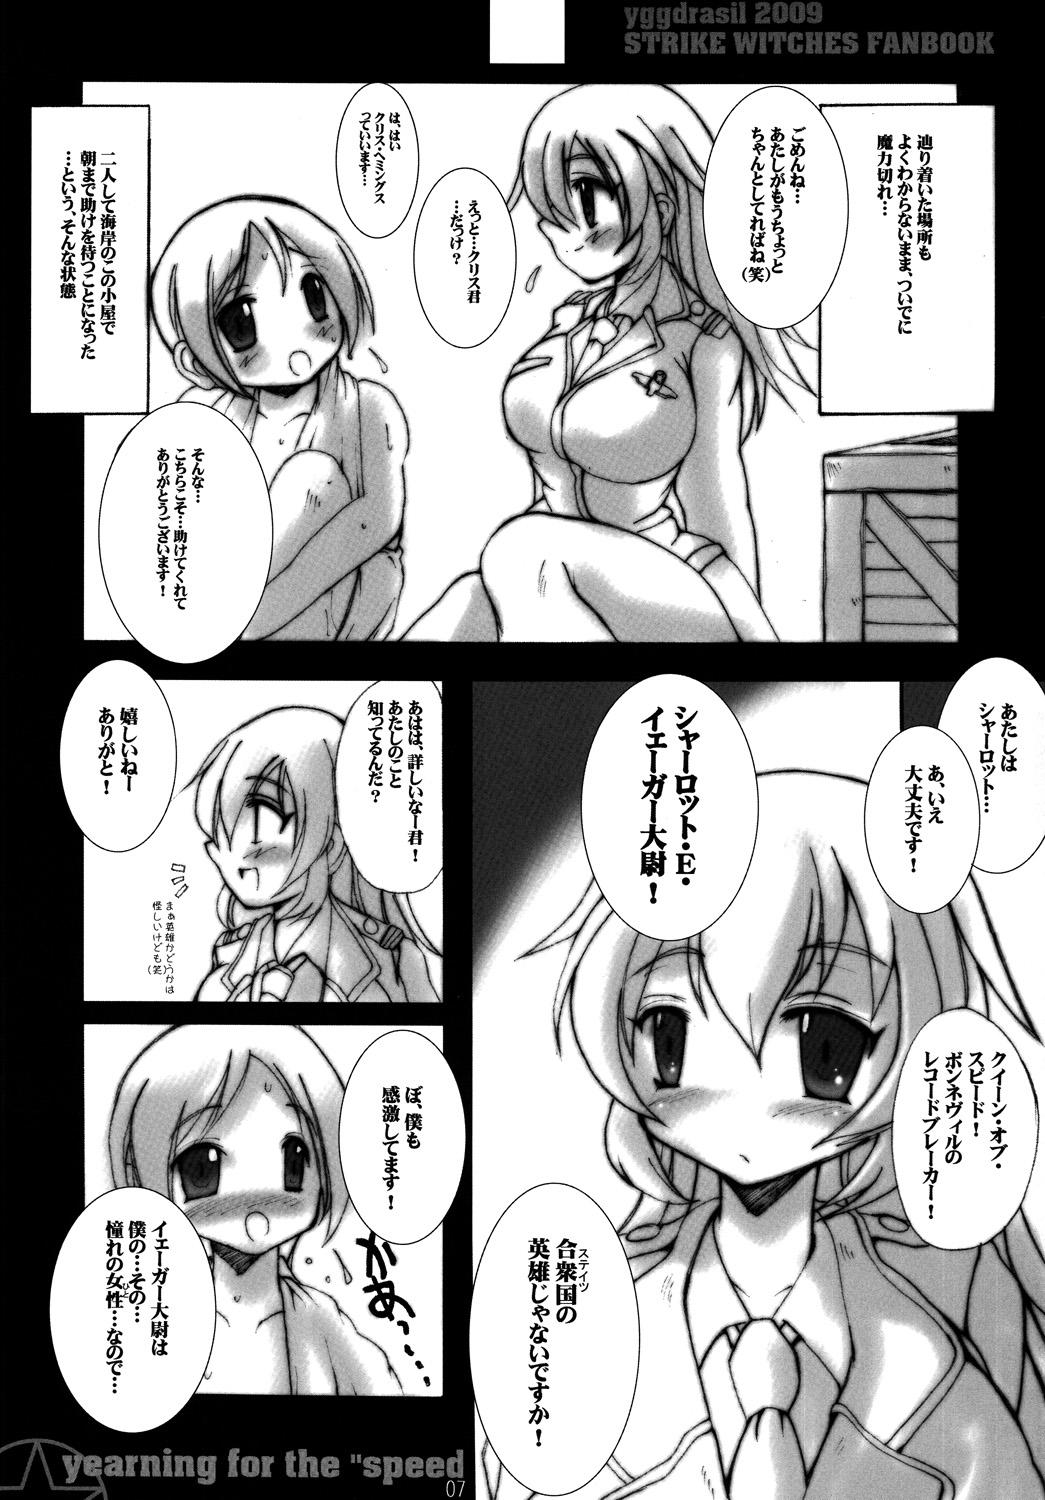 Big Tits yearning for the “speed” - Strike witches Teenies - Page 6